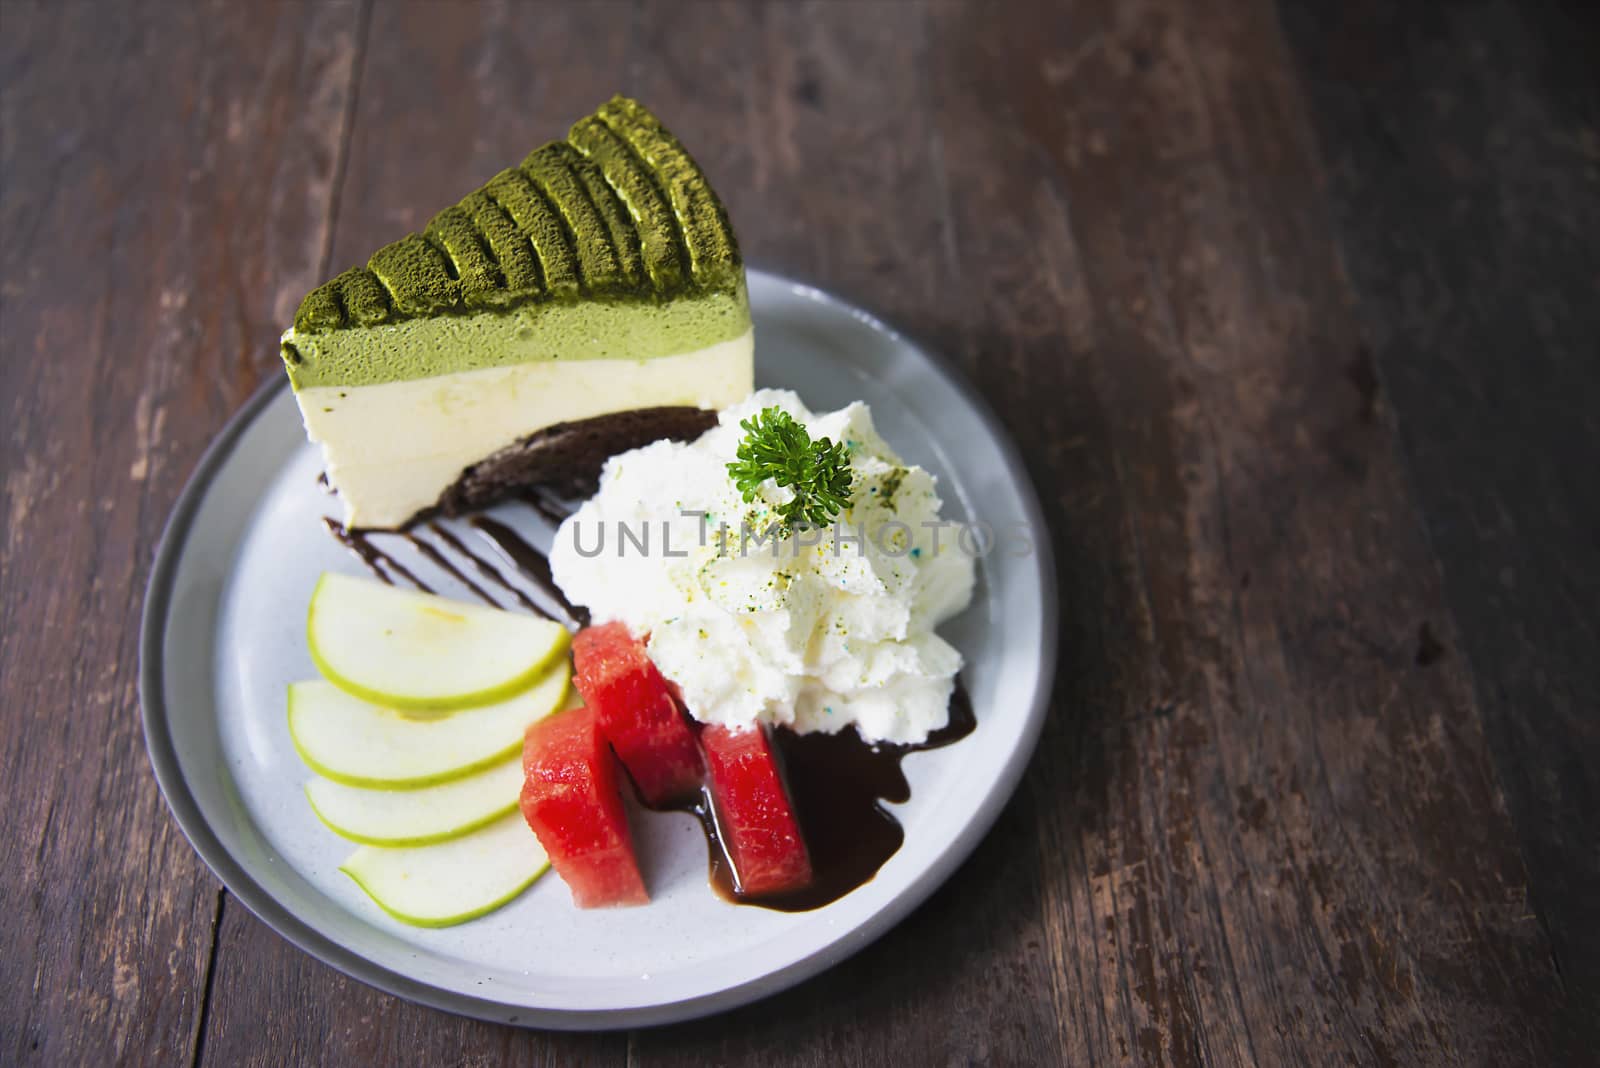 Colorful green tea favor cake with well decorated fruit pieces and whipped cream in white plate - cake recipe menu concept